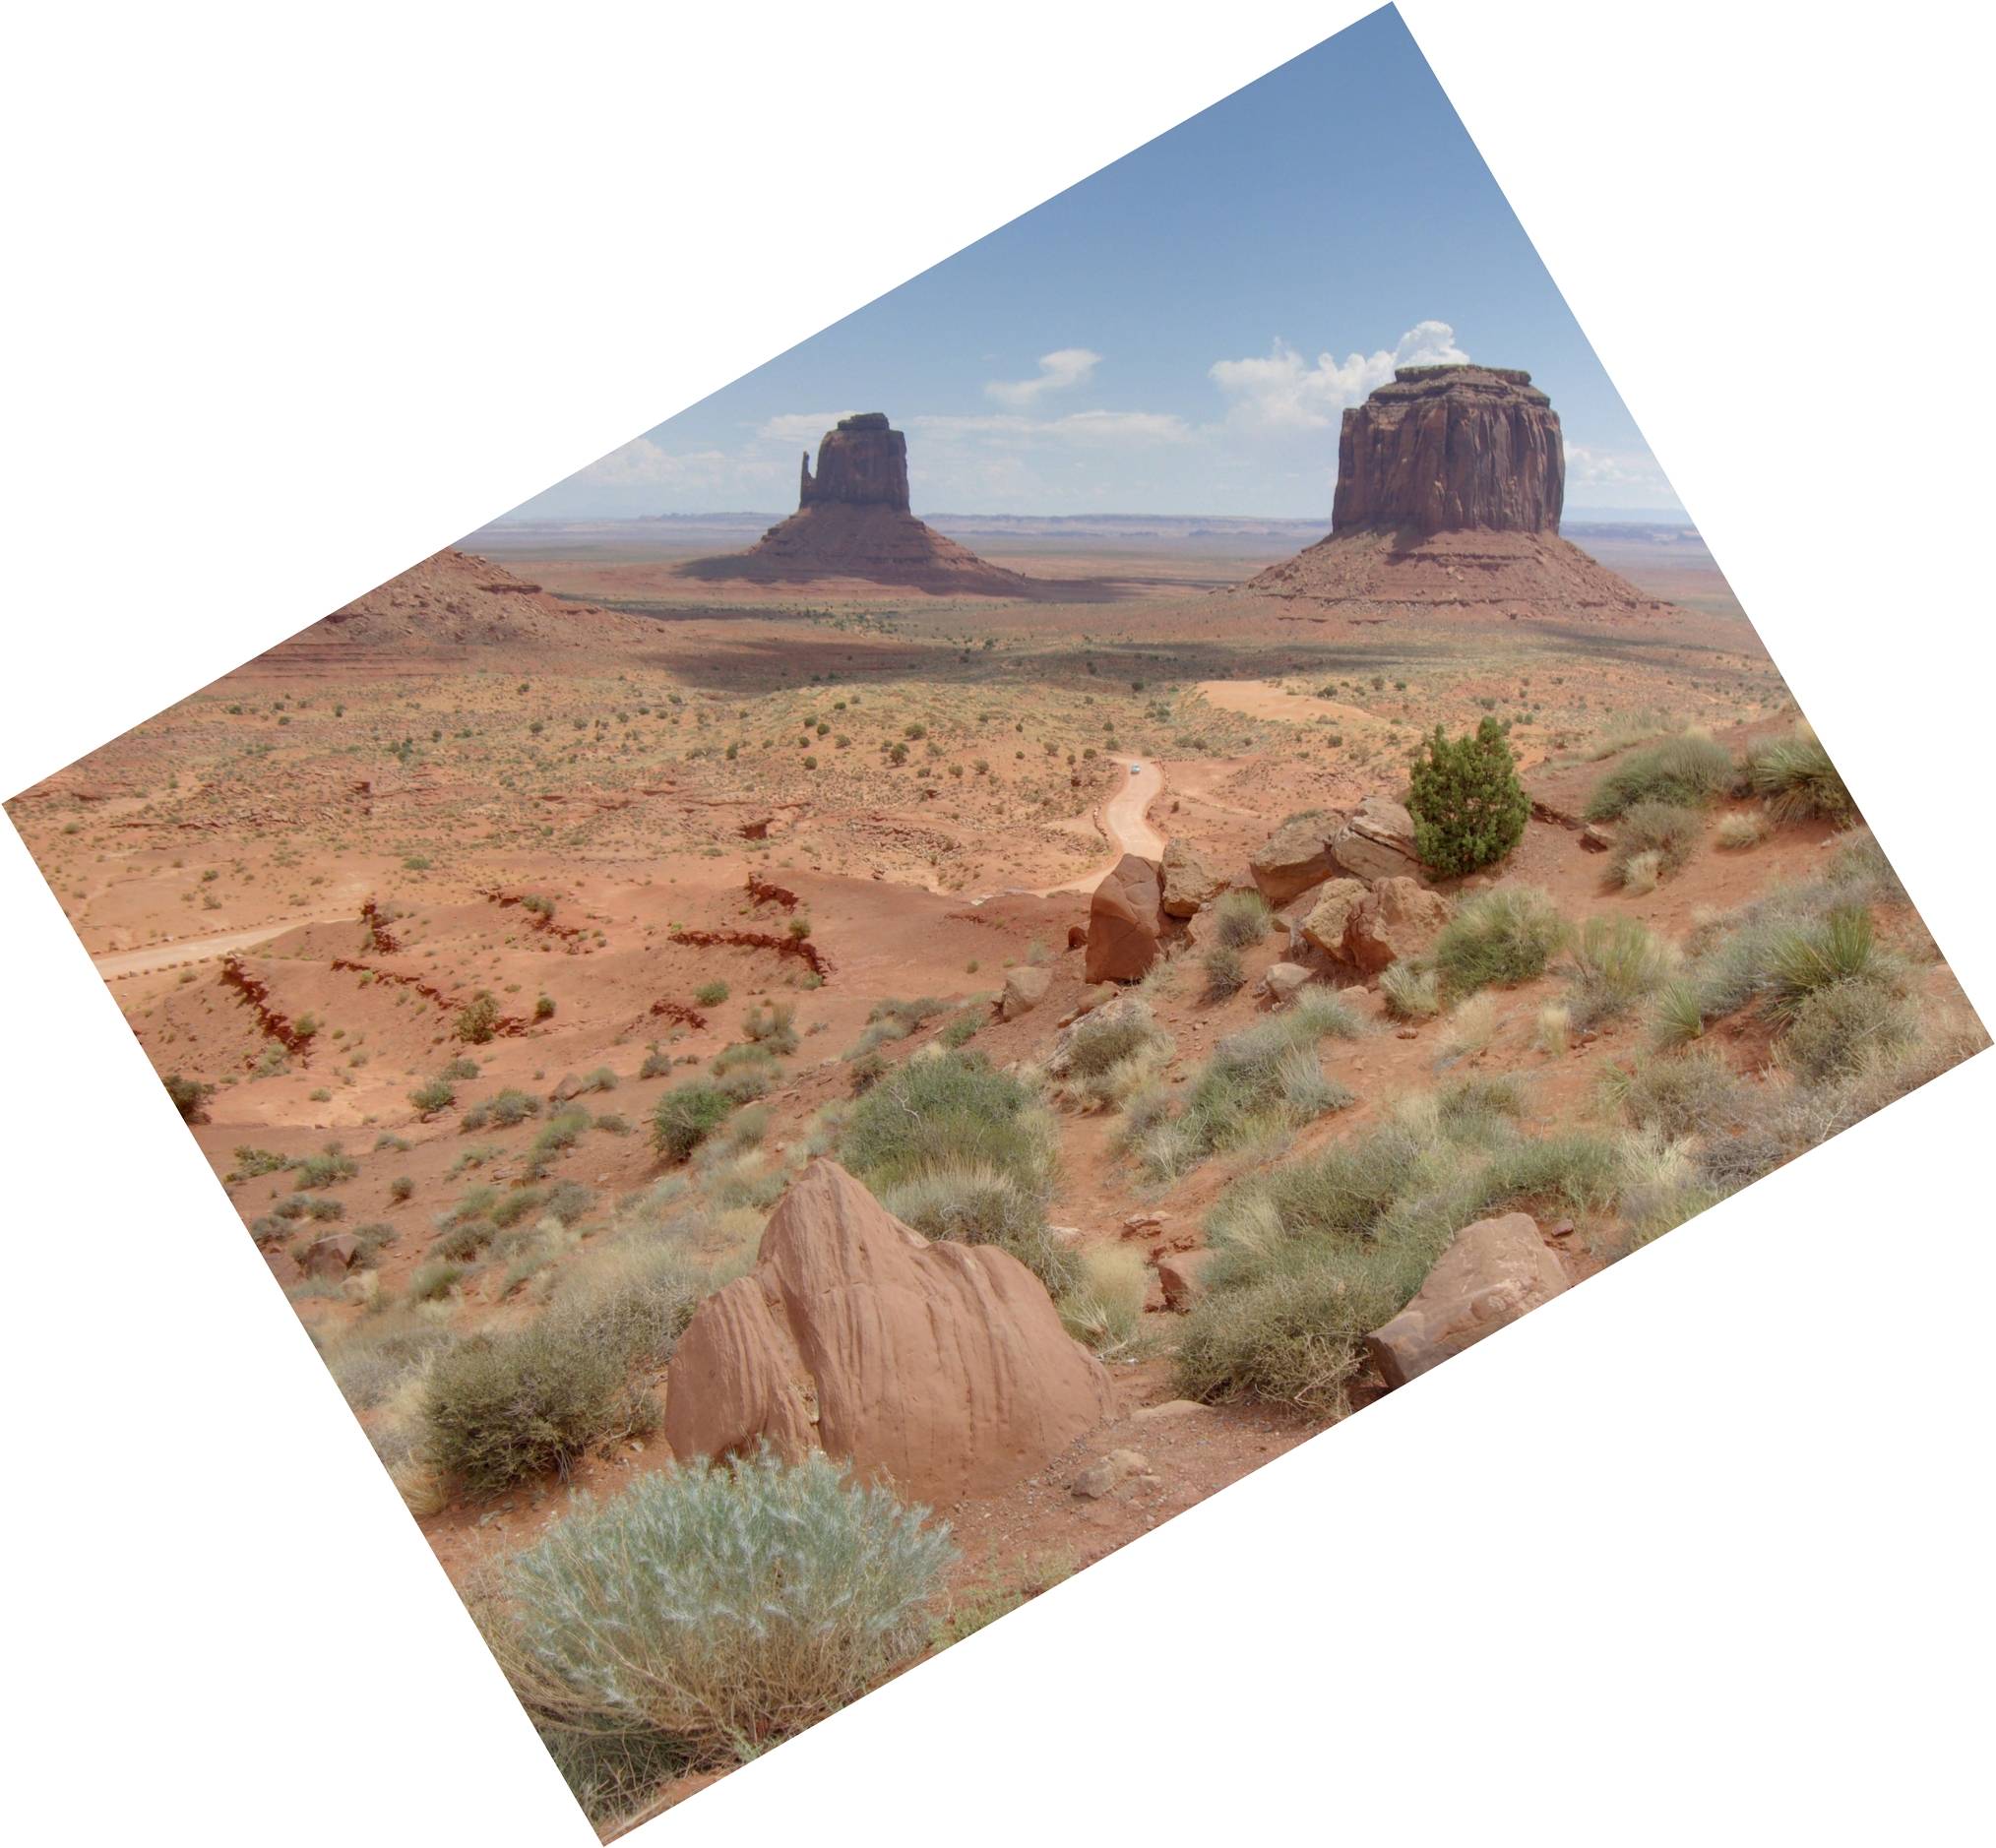 Image: The Merrick (left) and the East Mitten (right) buttes as seen from the Visitor Center